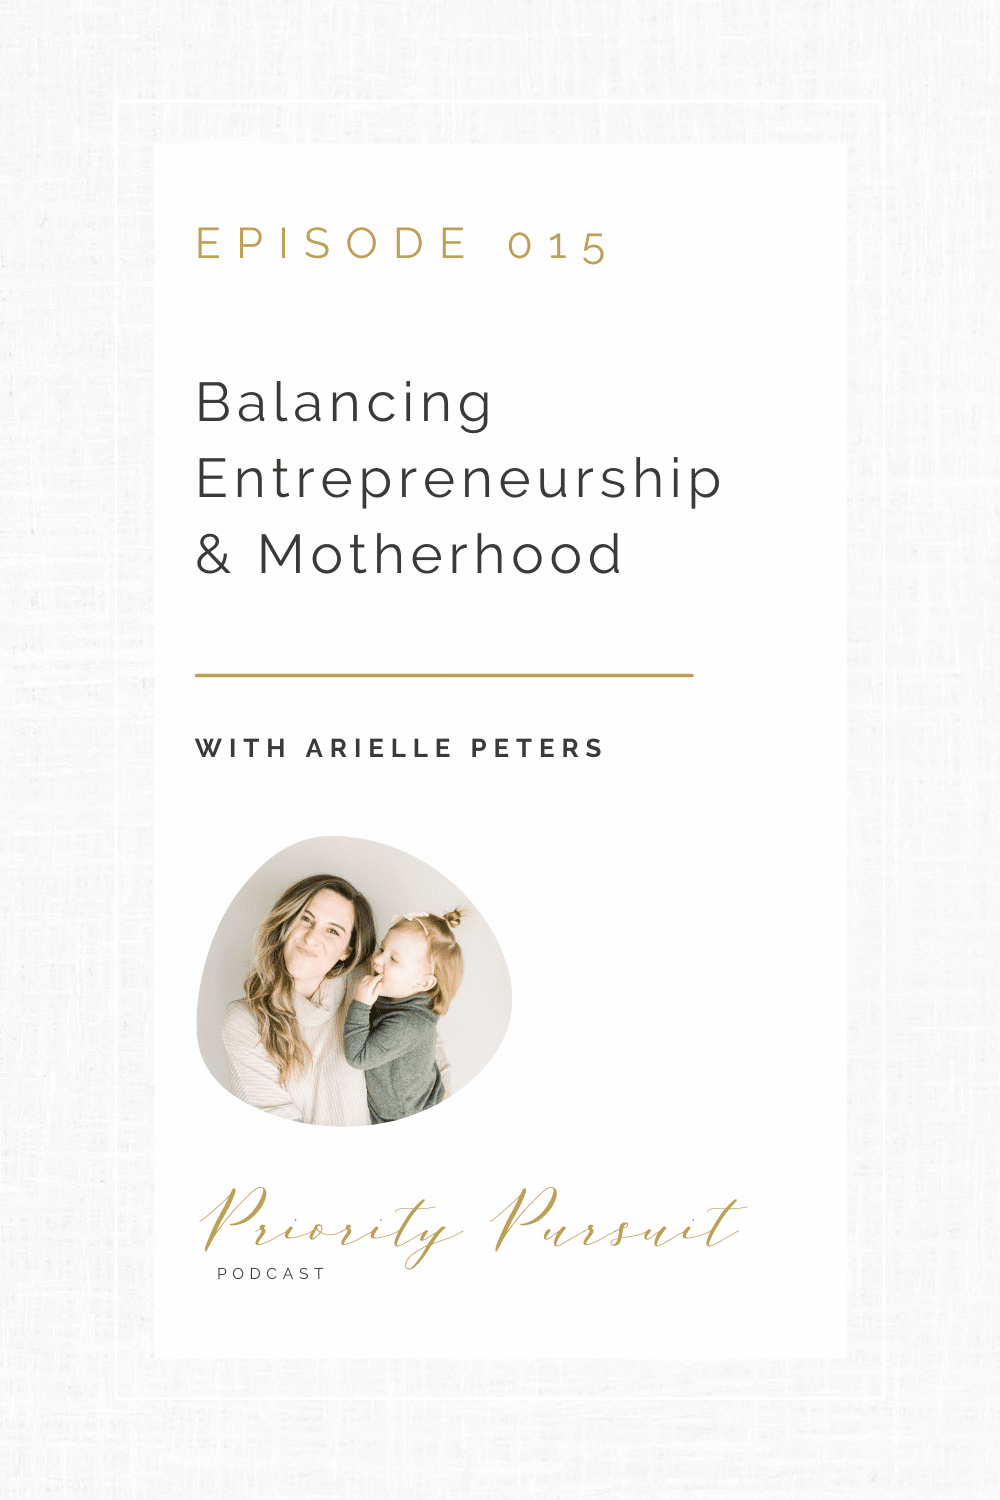 South Bend, Indiana Wedding Photographer Arielle Peters shares her experiences and offers practical advice for balancing entrepreneurship and motherhood. 